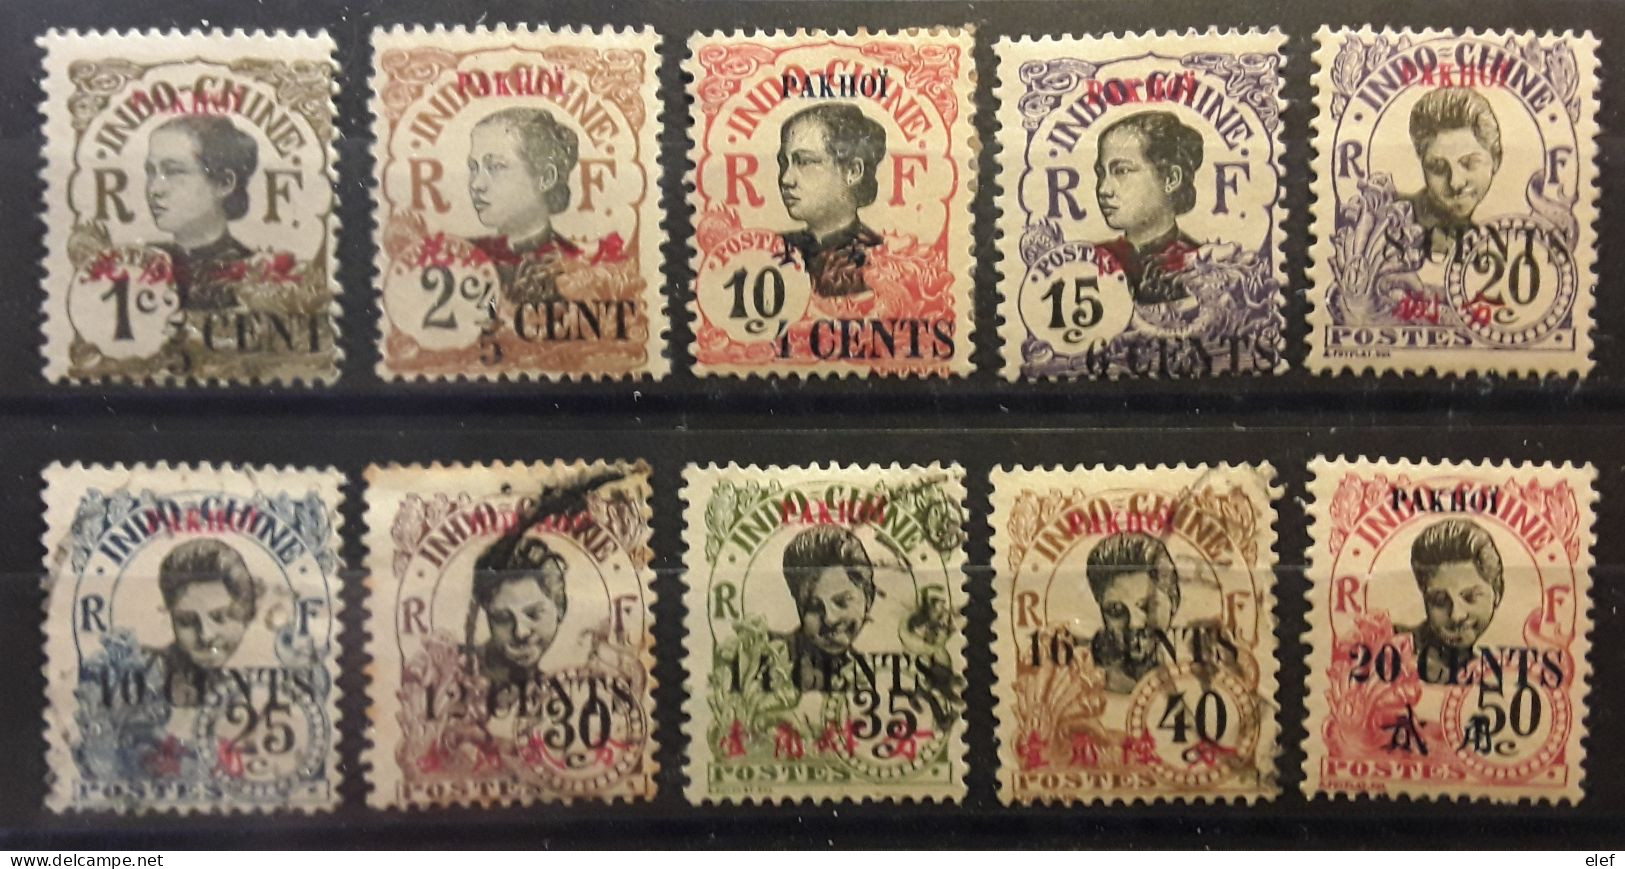 PAKHOI PAK HOI 1919, 10 Timbres Yvert No 51,52,55 / 62 Neufs Et Obl TB - Used Stamps